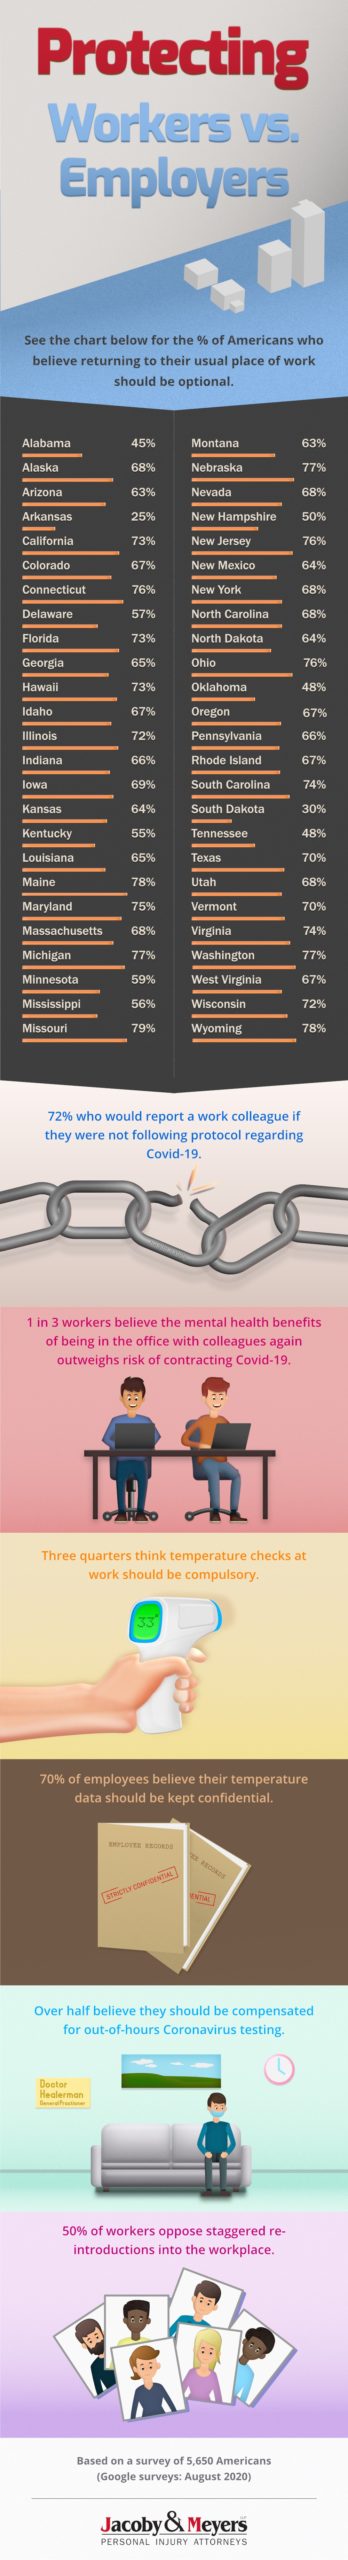 Covid-19 Frontline Worker Protection Survey Results Jacoby & Meyers LLP Infographic